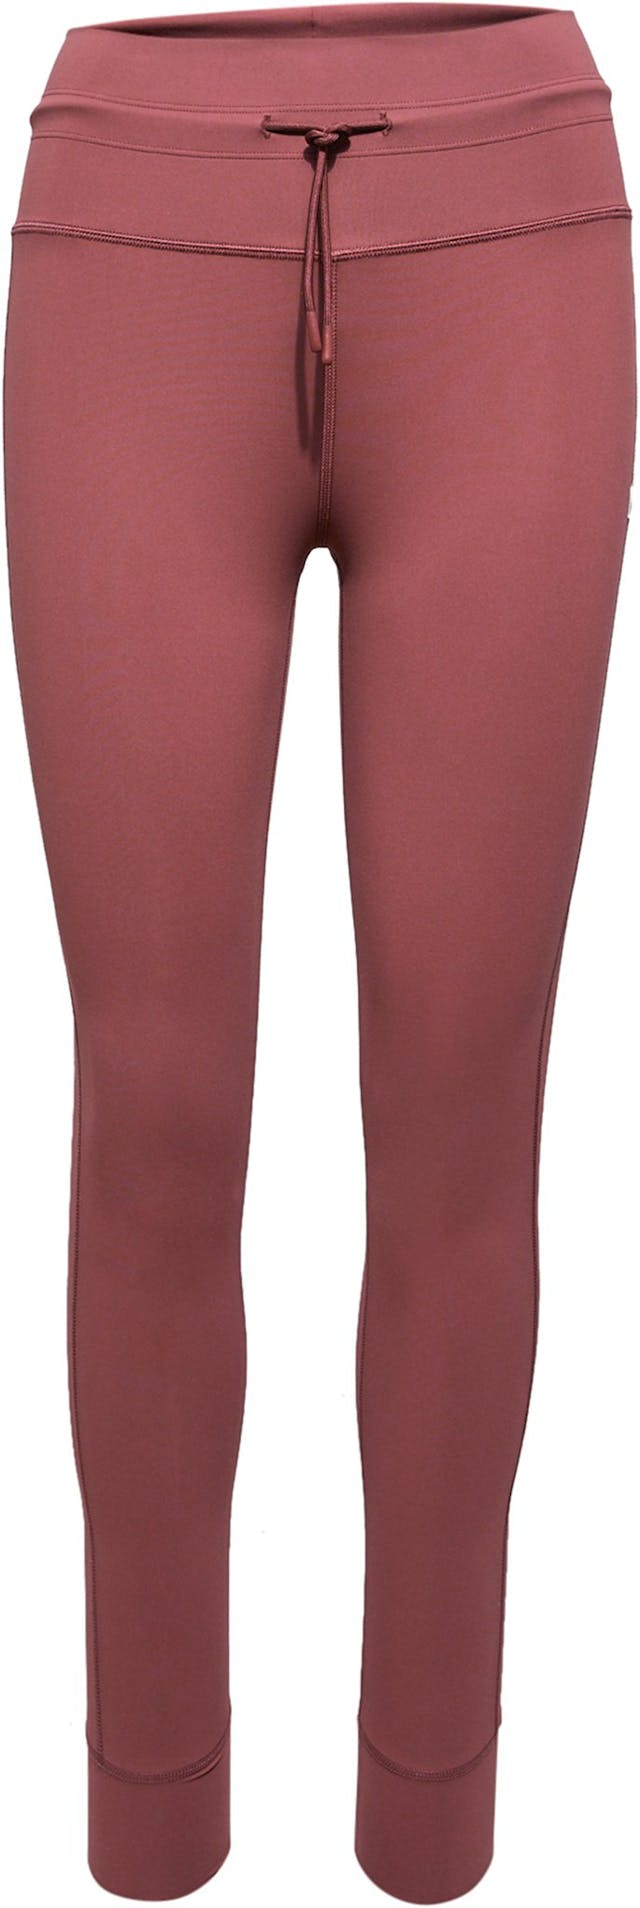 Product image for Daily Legging - Women's